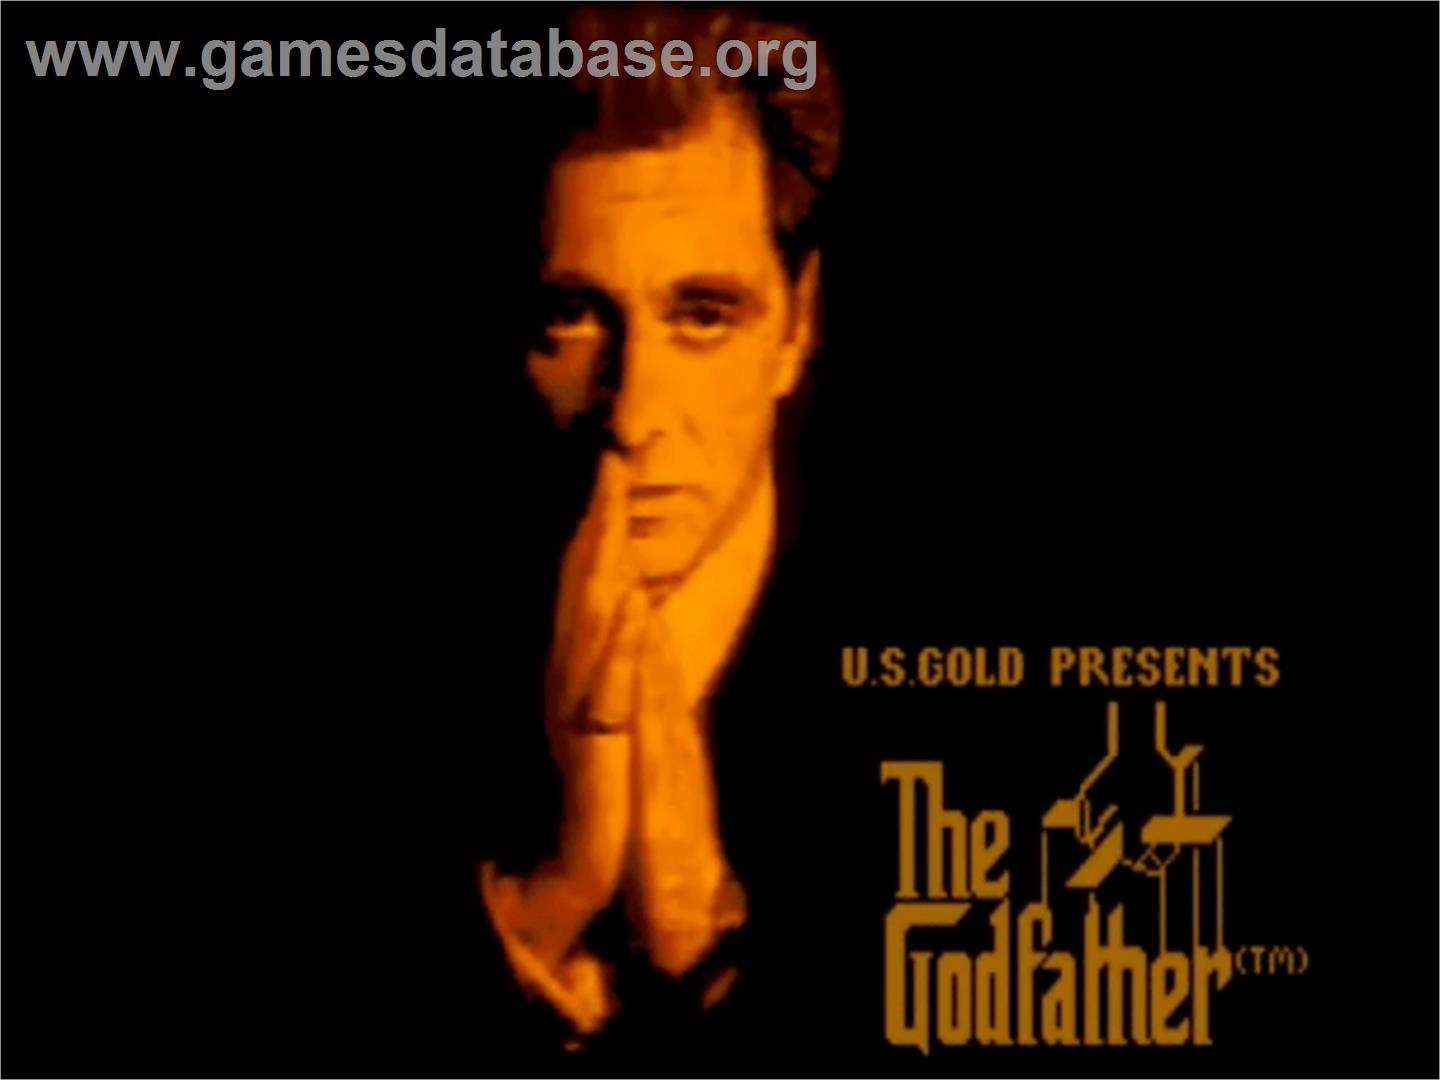 Godfather: The Action Game - Commodore Amiga - Artwork - Title Screen